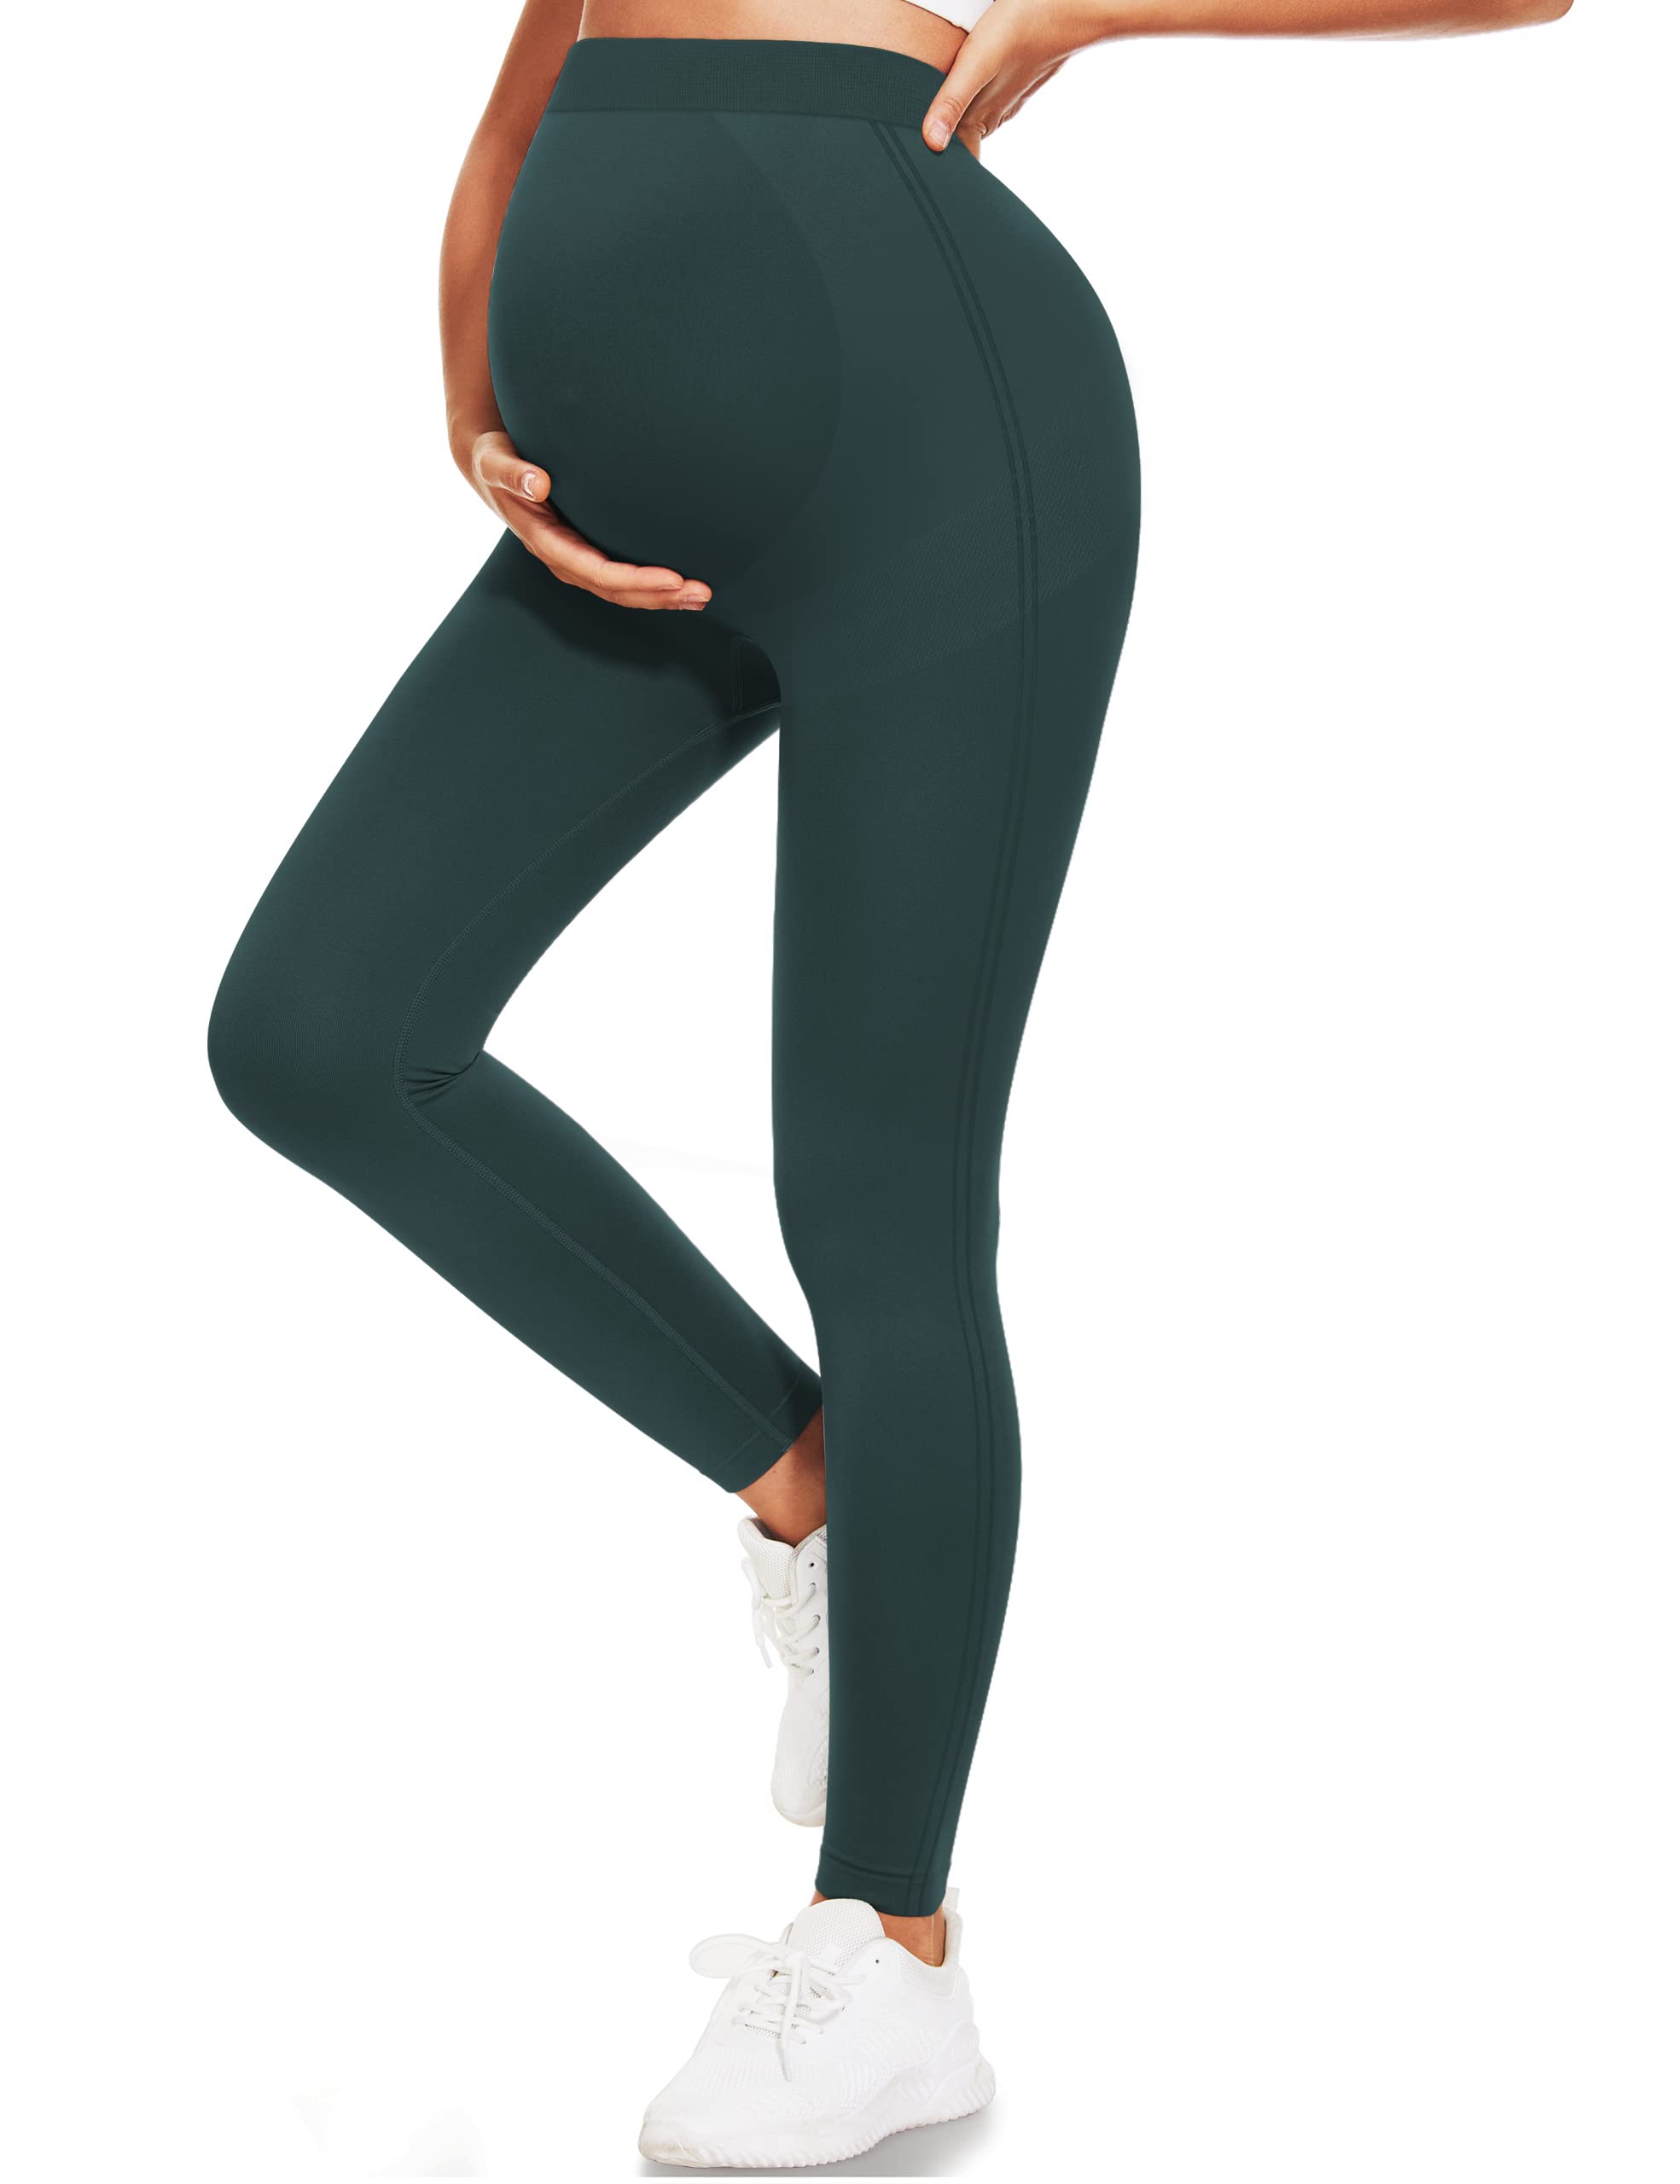 Purplepig Maternity Leggings Over The Belly Non-See-Through Butt